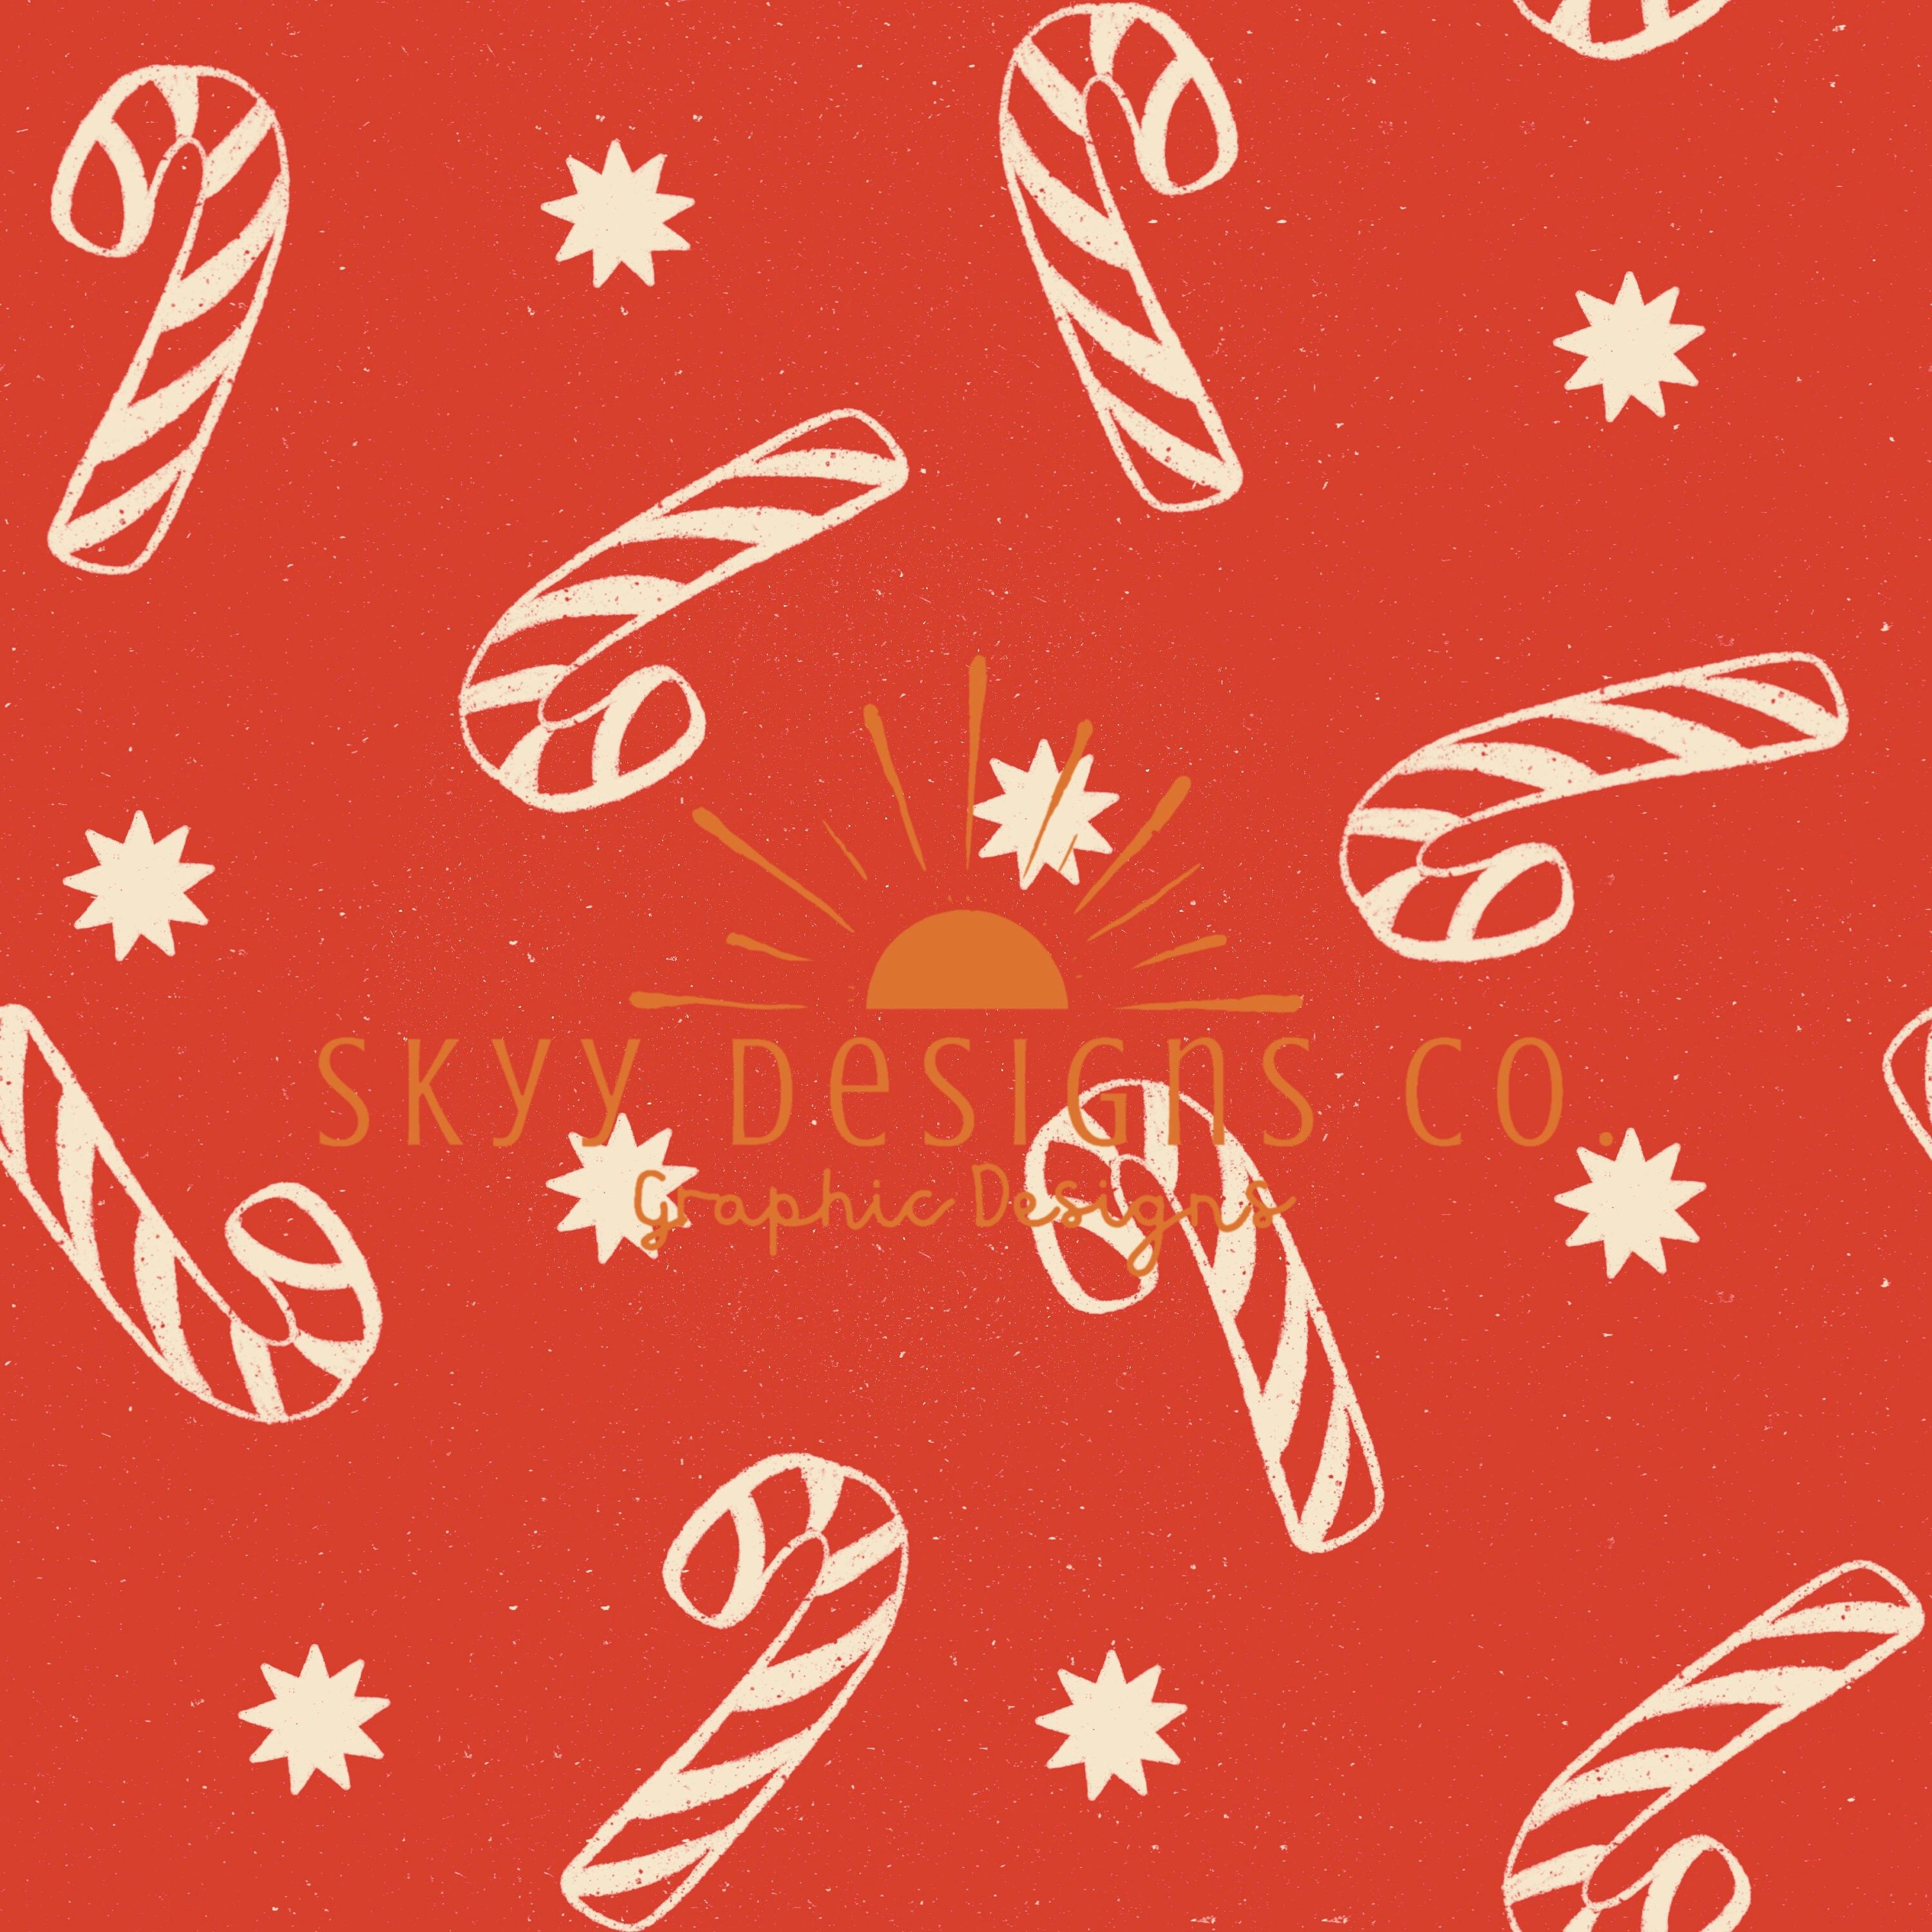 A candy cane pattern on red background - Candy cane